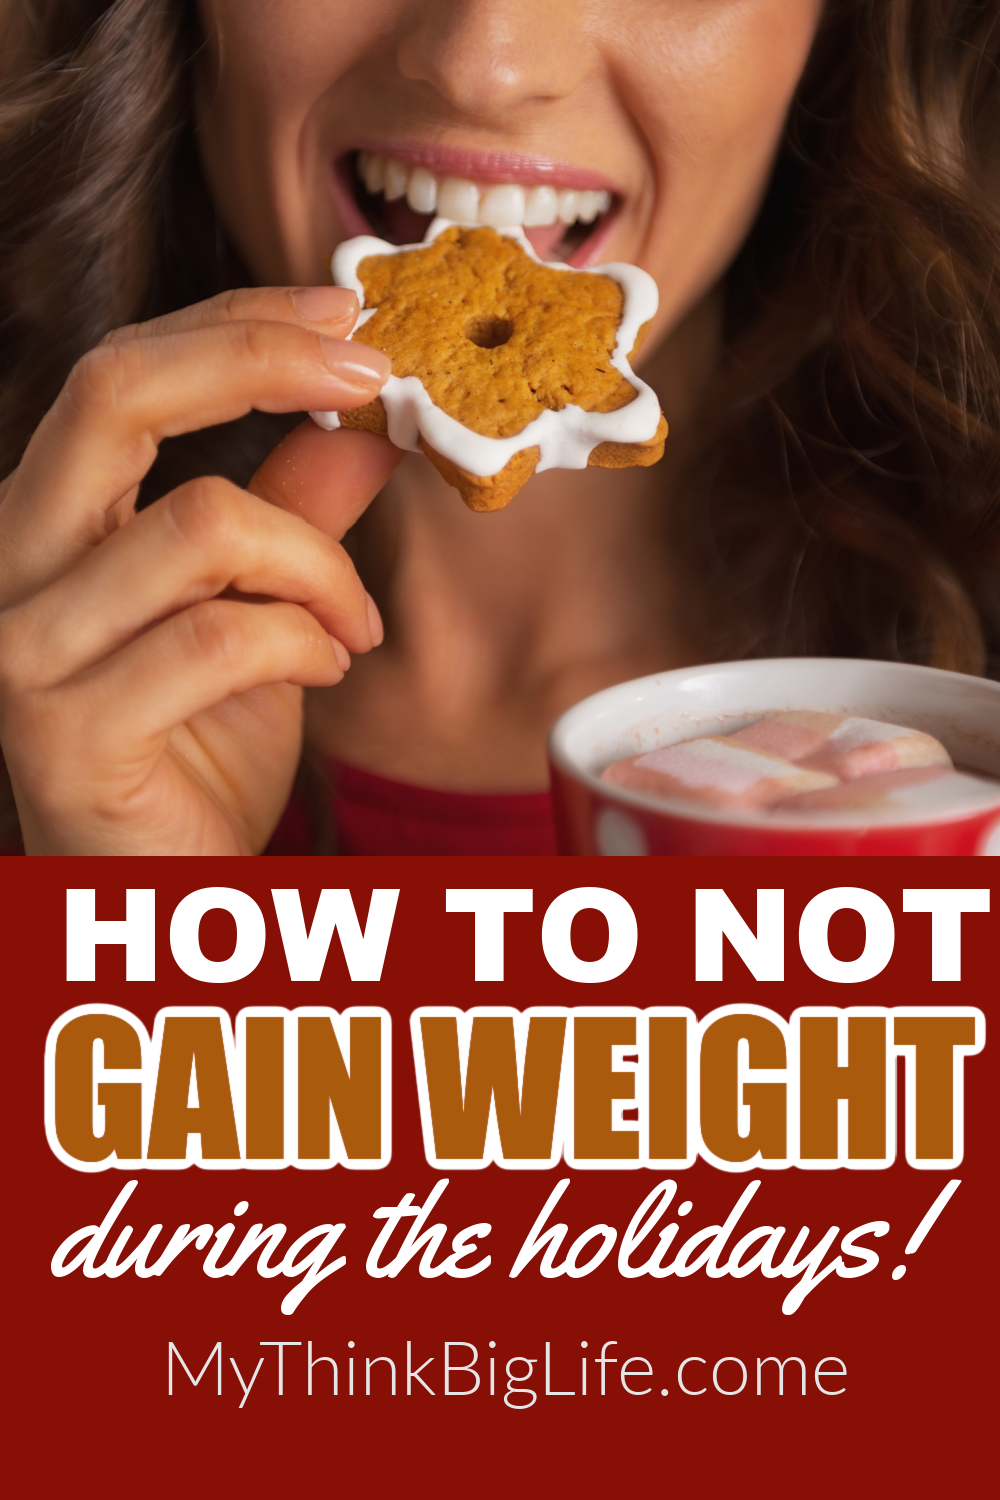 Picture of woman eating a cookie with the words: How to not gain weight during the holidays.